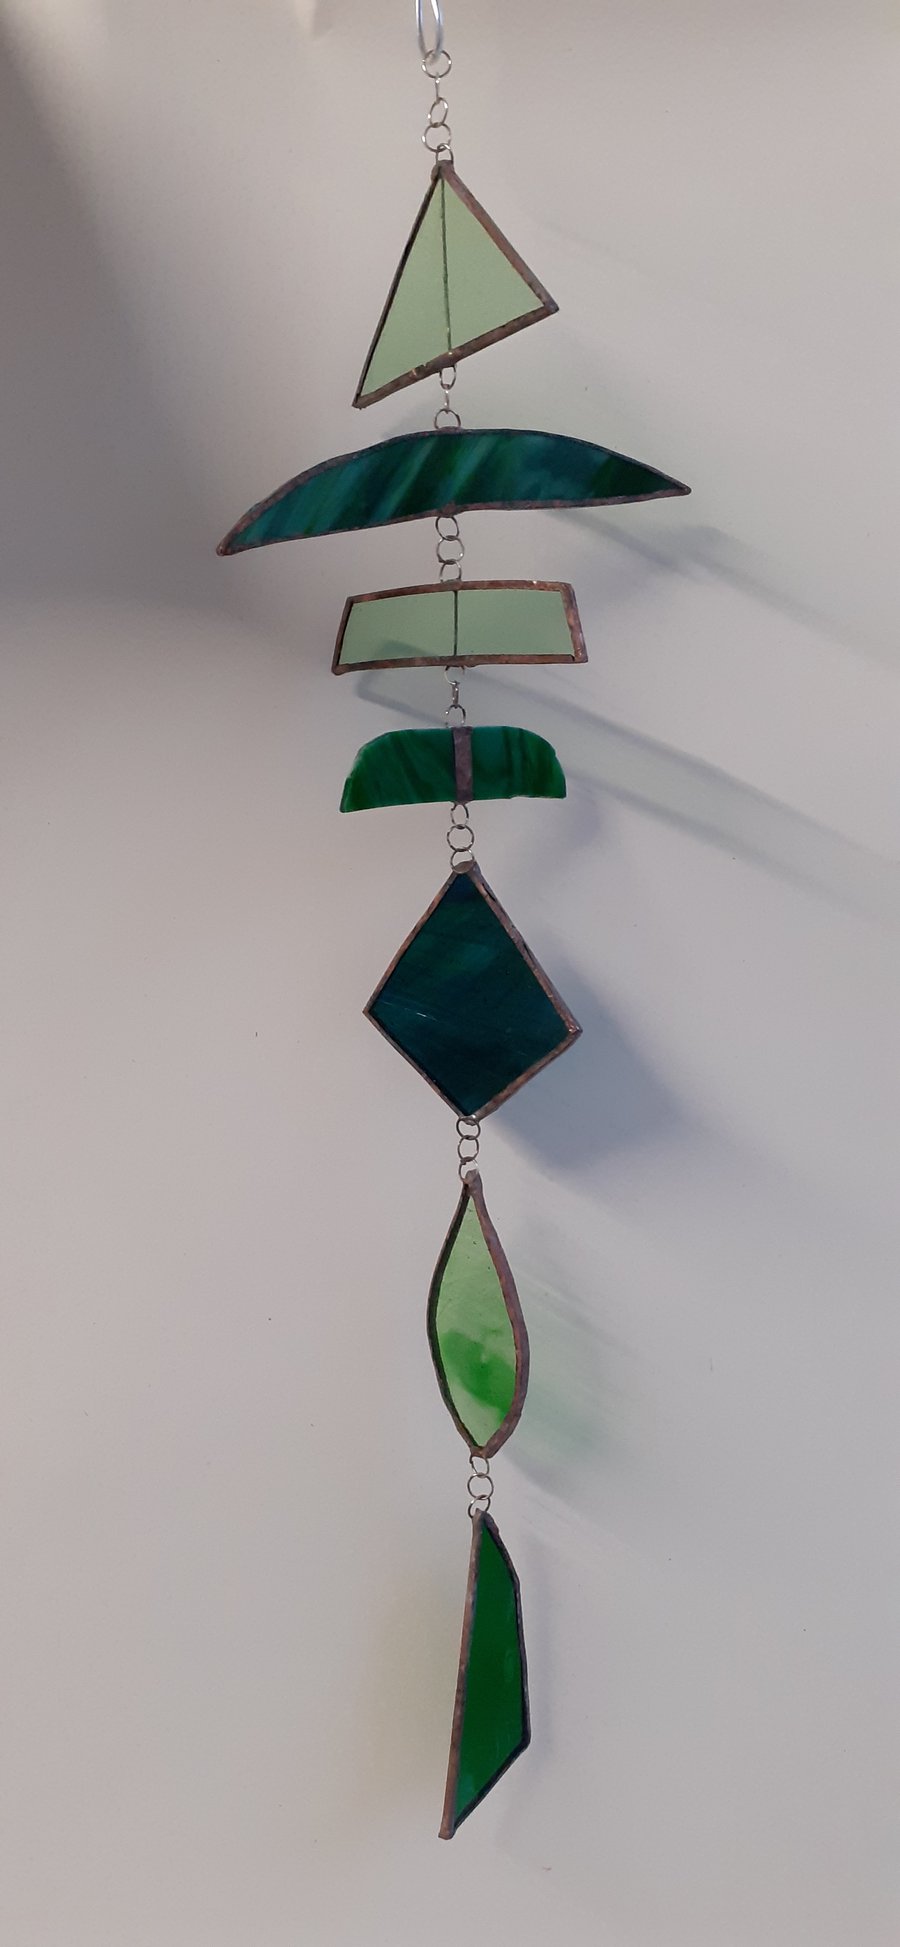 Stained glass mobile in shades of green